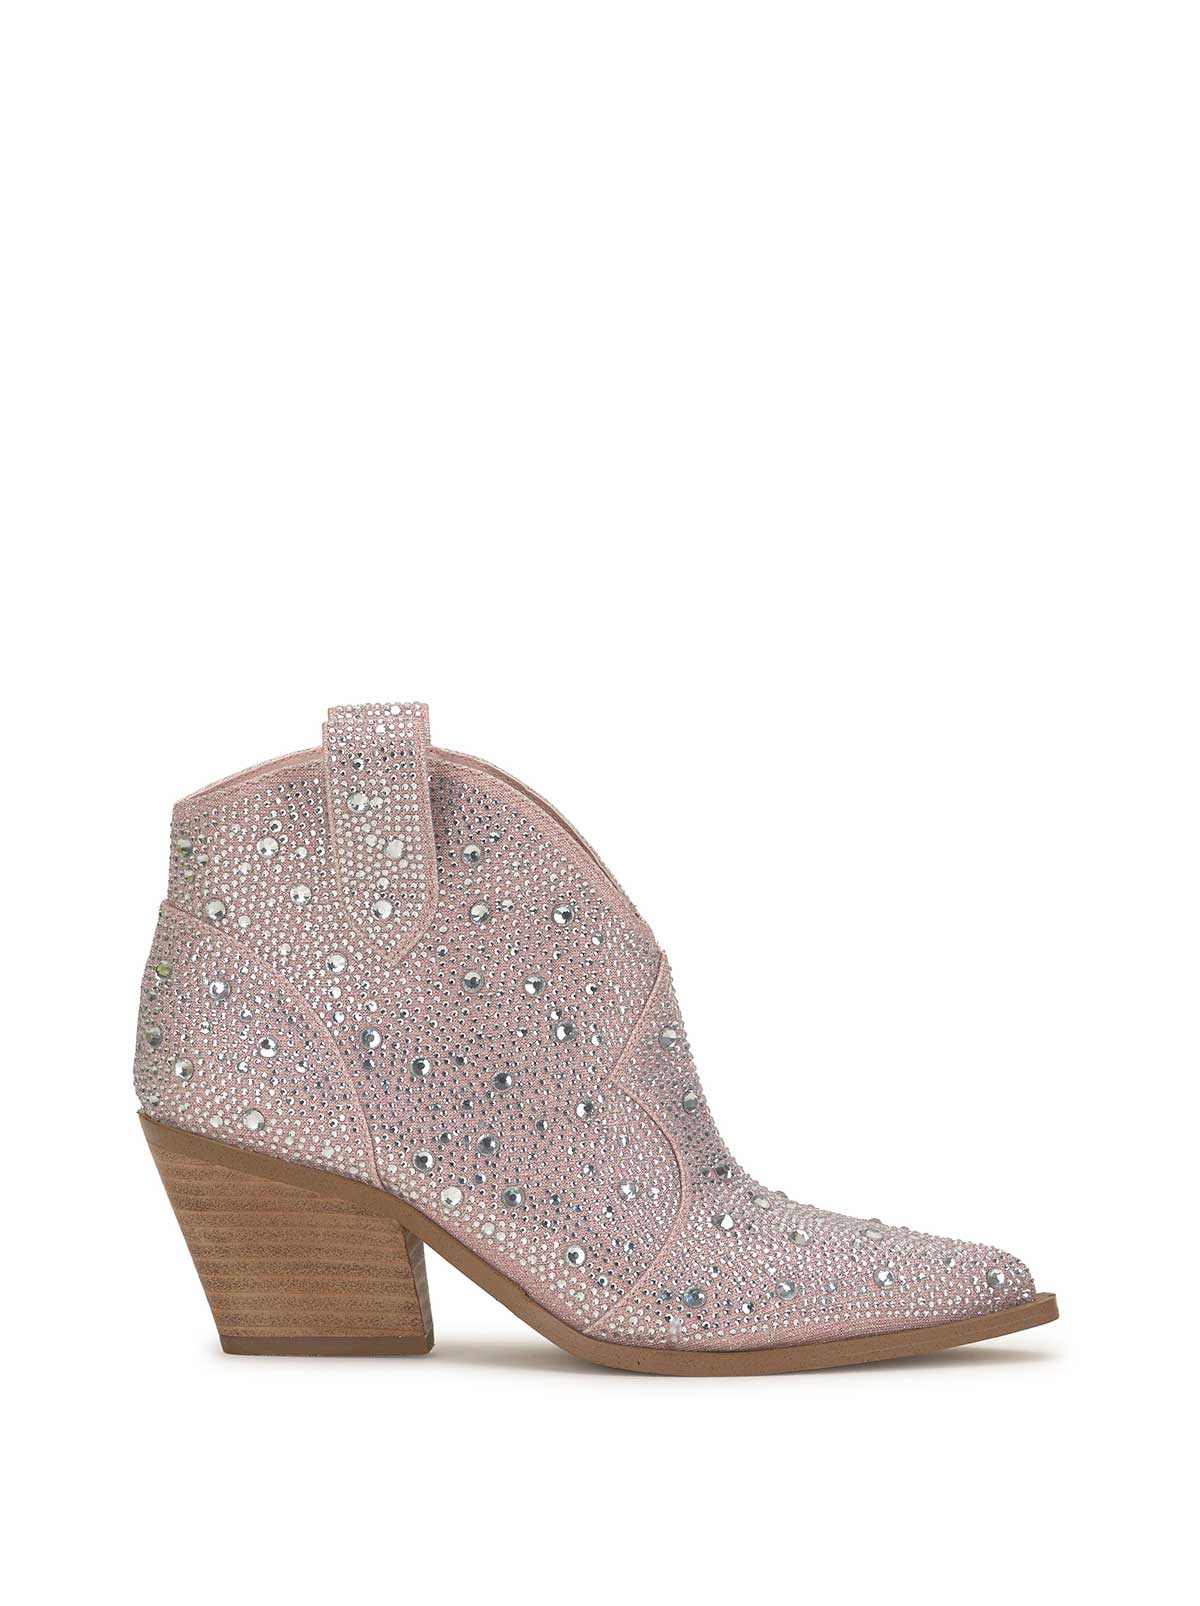 Image of Zadie Bootie in Blush